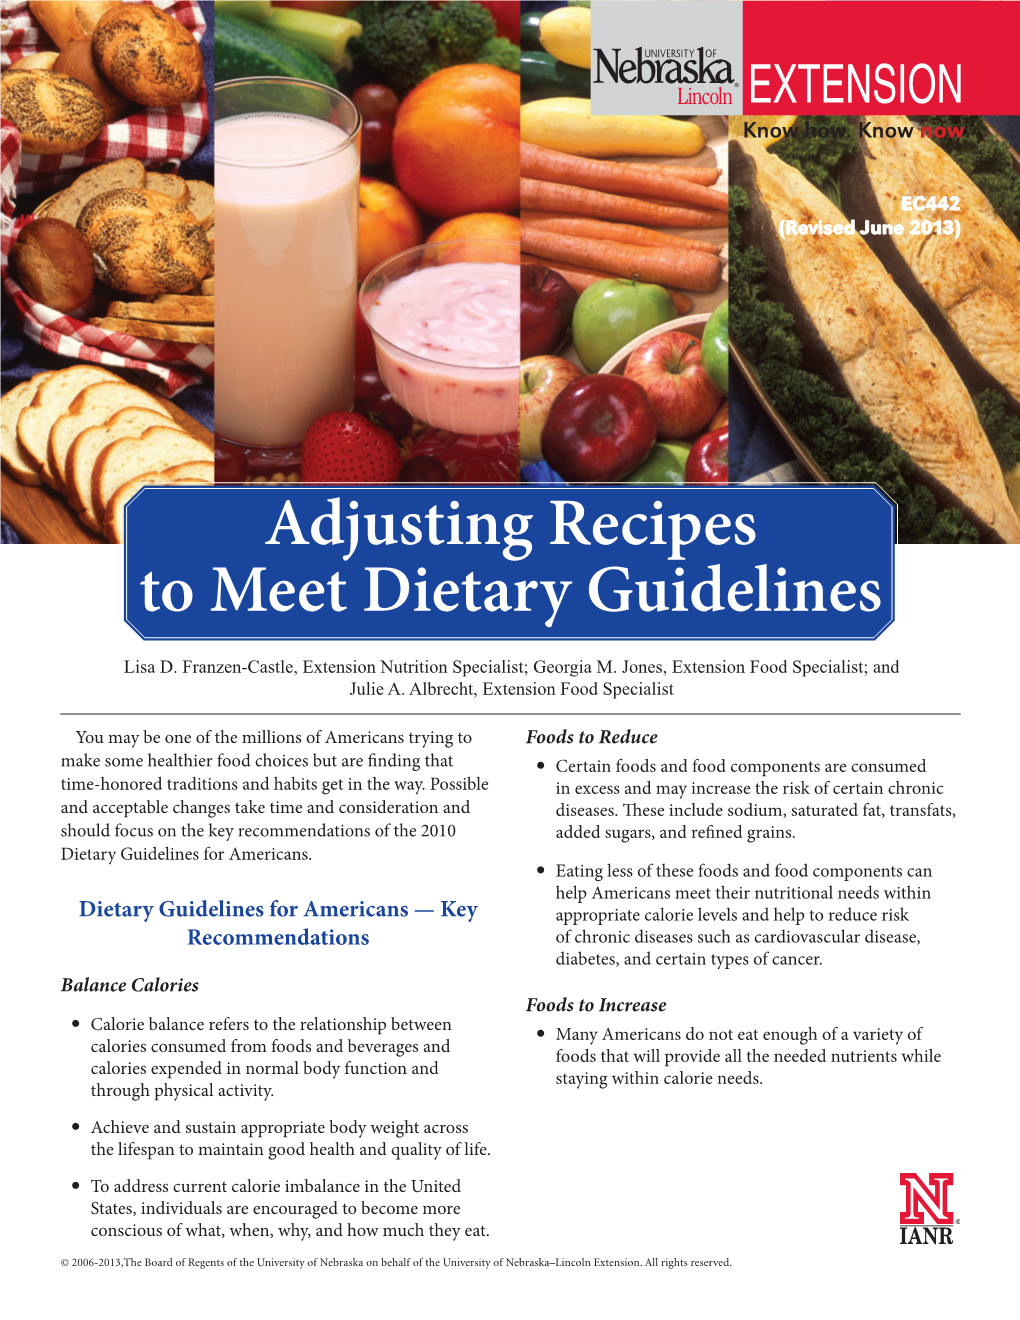 Adjusting Recipes to Meet Dietary Guidelines